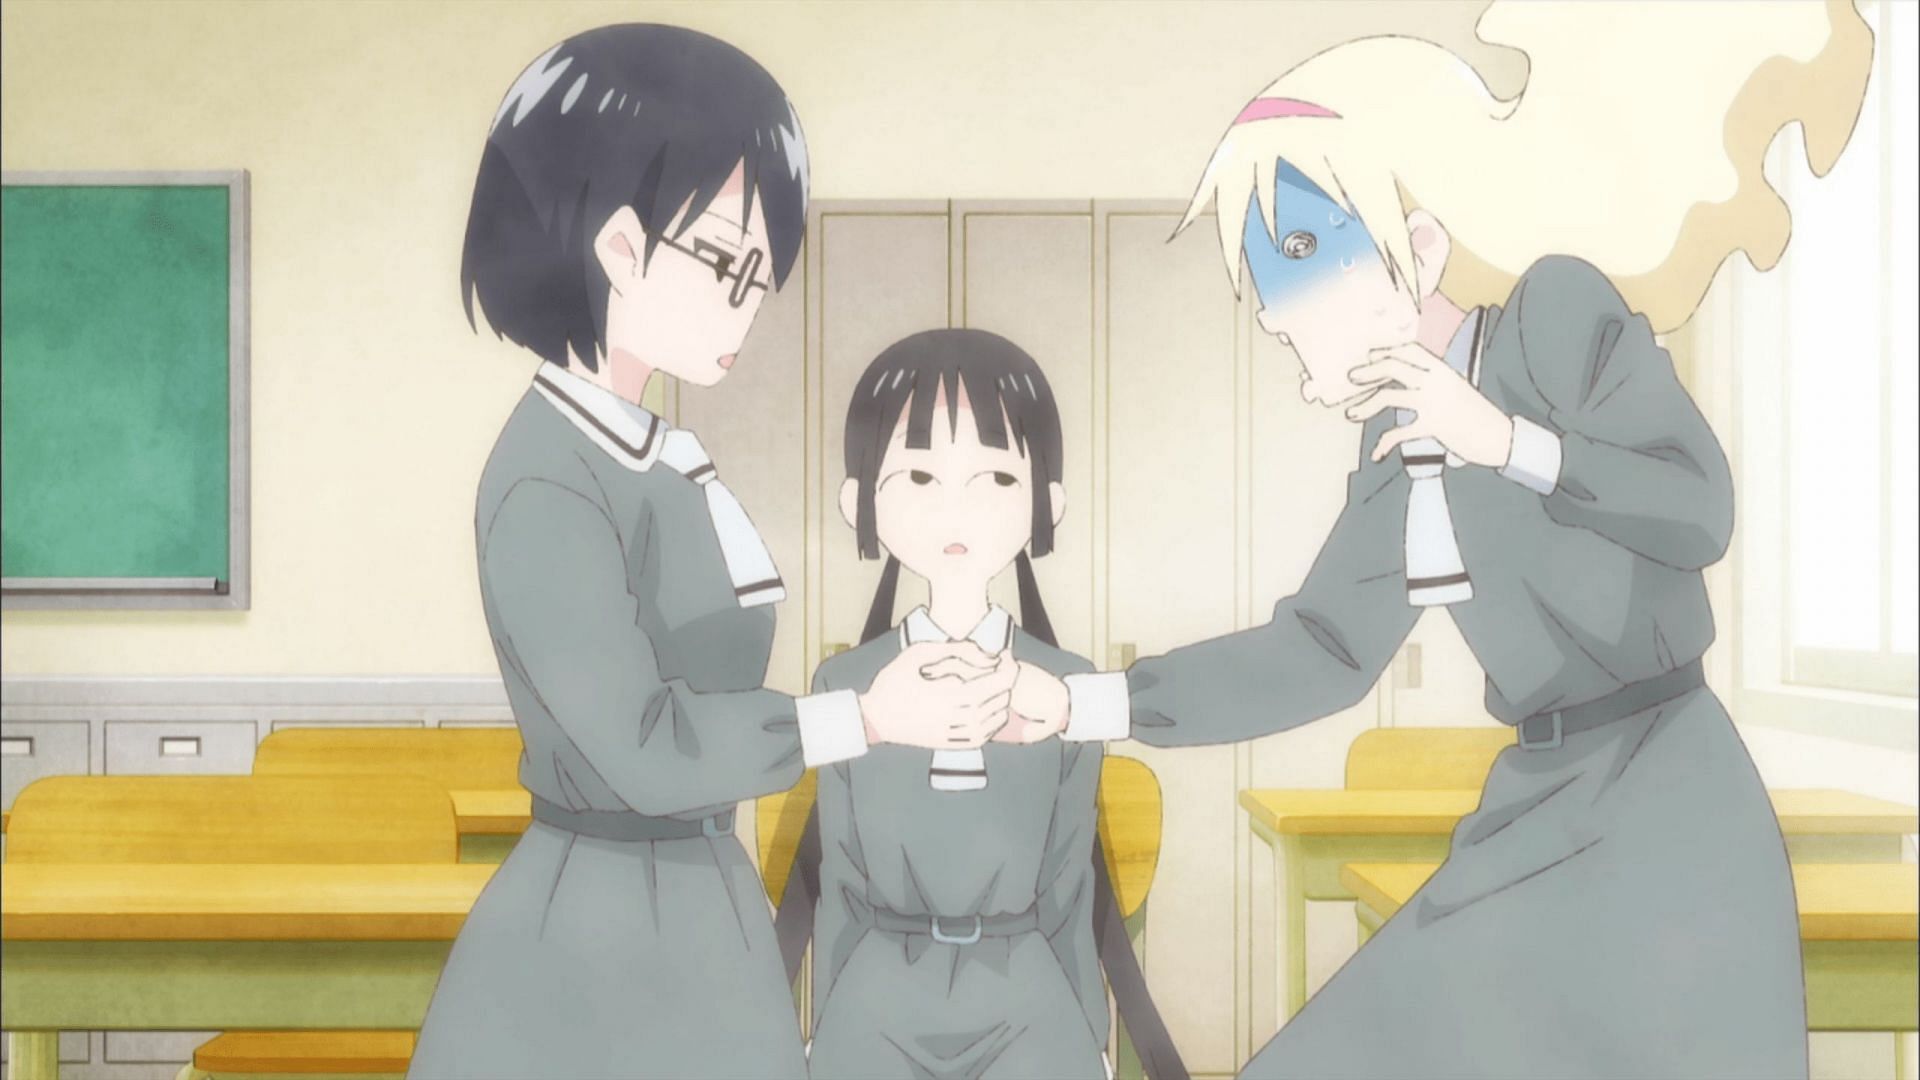 A still from Asobi Asobase featuring the main characters (Image via Lerche)